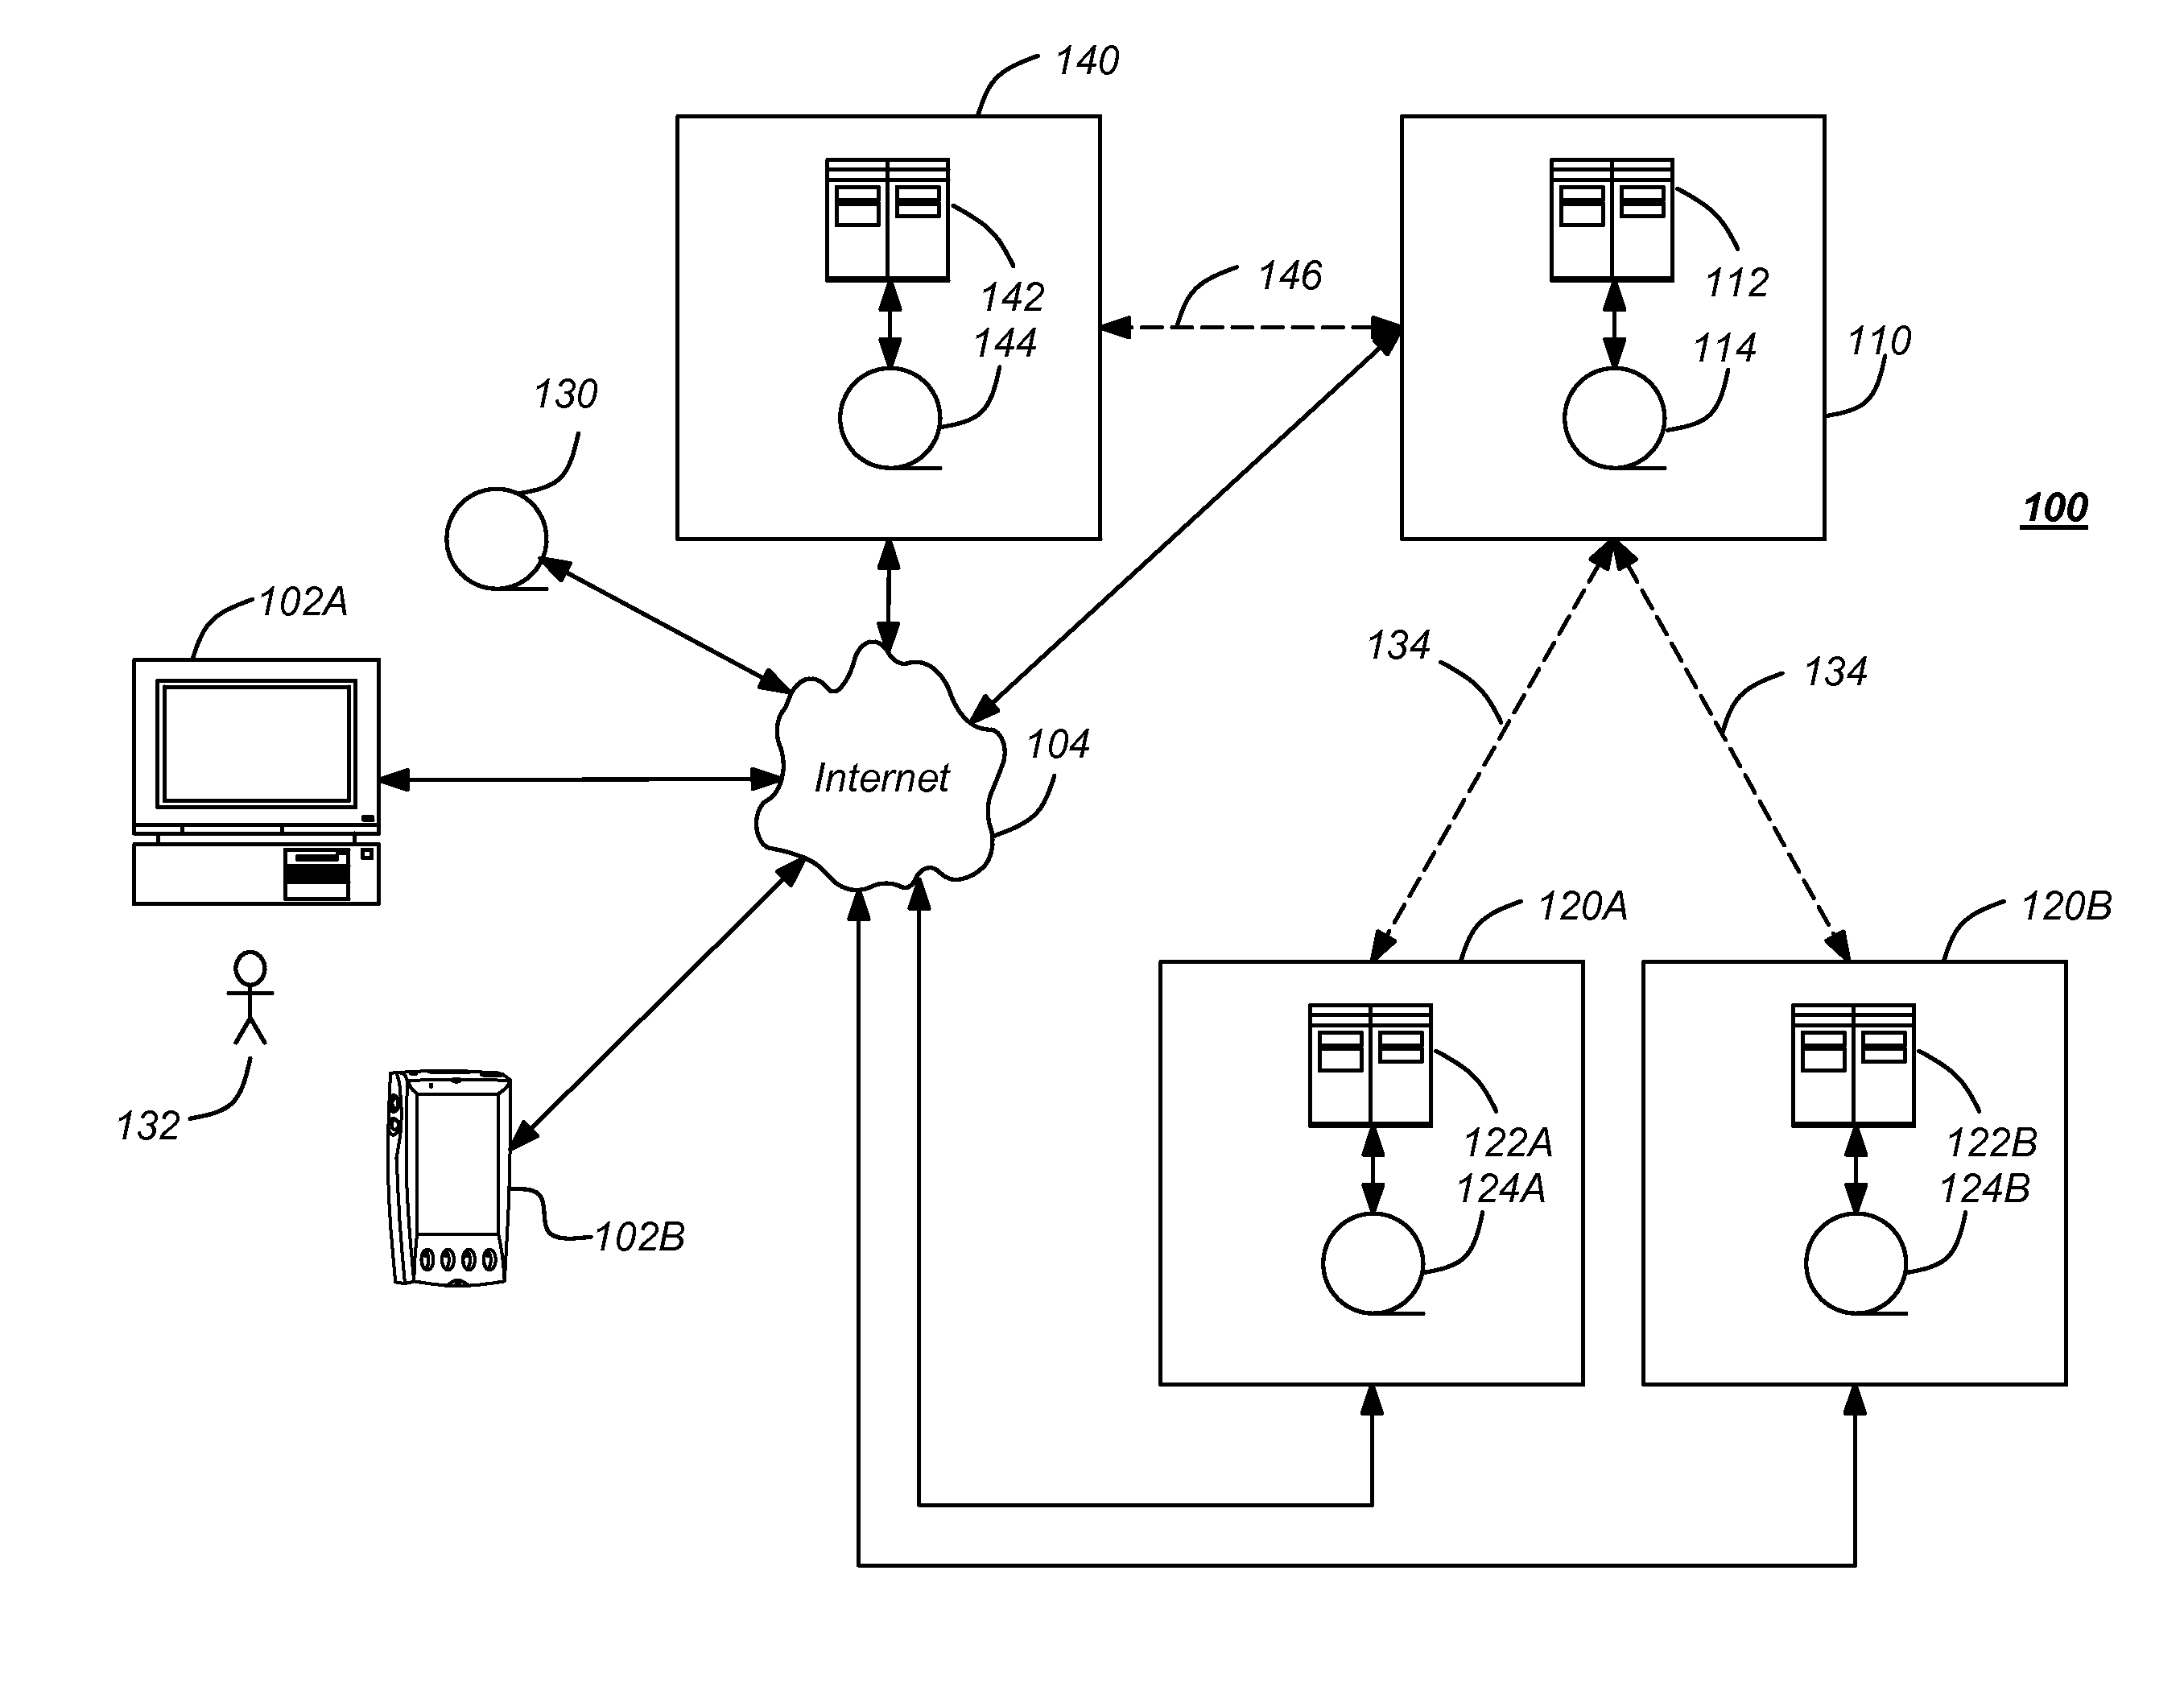 Bandwidth allocation with modified seek function